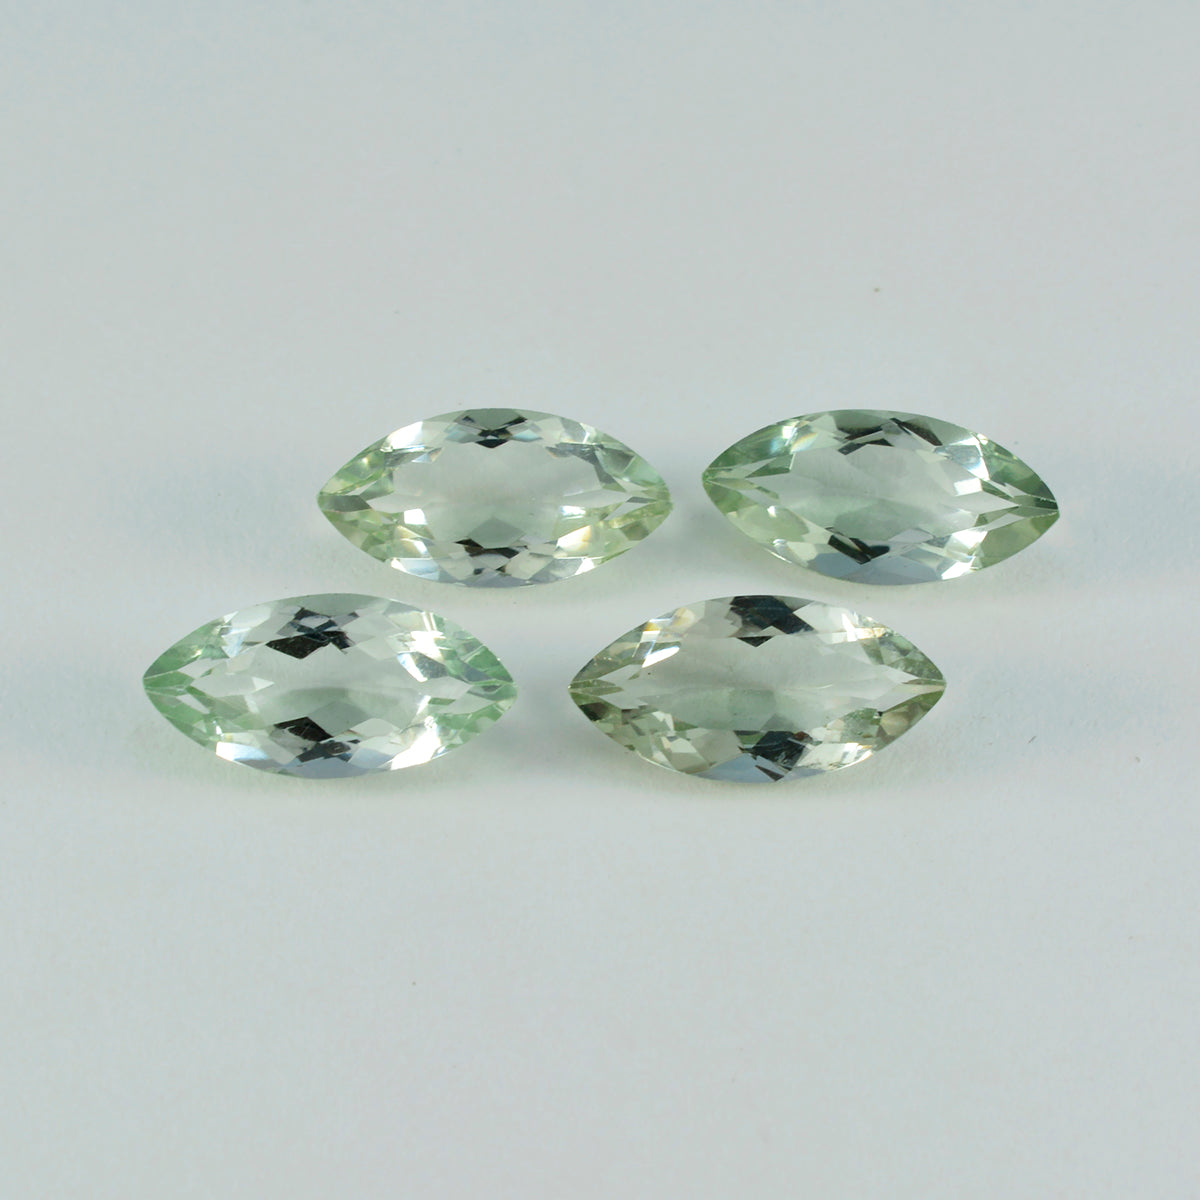 Riyogems 1PC Green Amethyst Faceted 9x18 mm Marquise Shape handsome Quality Loose Stone